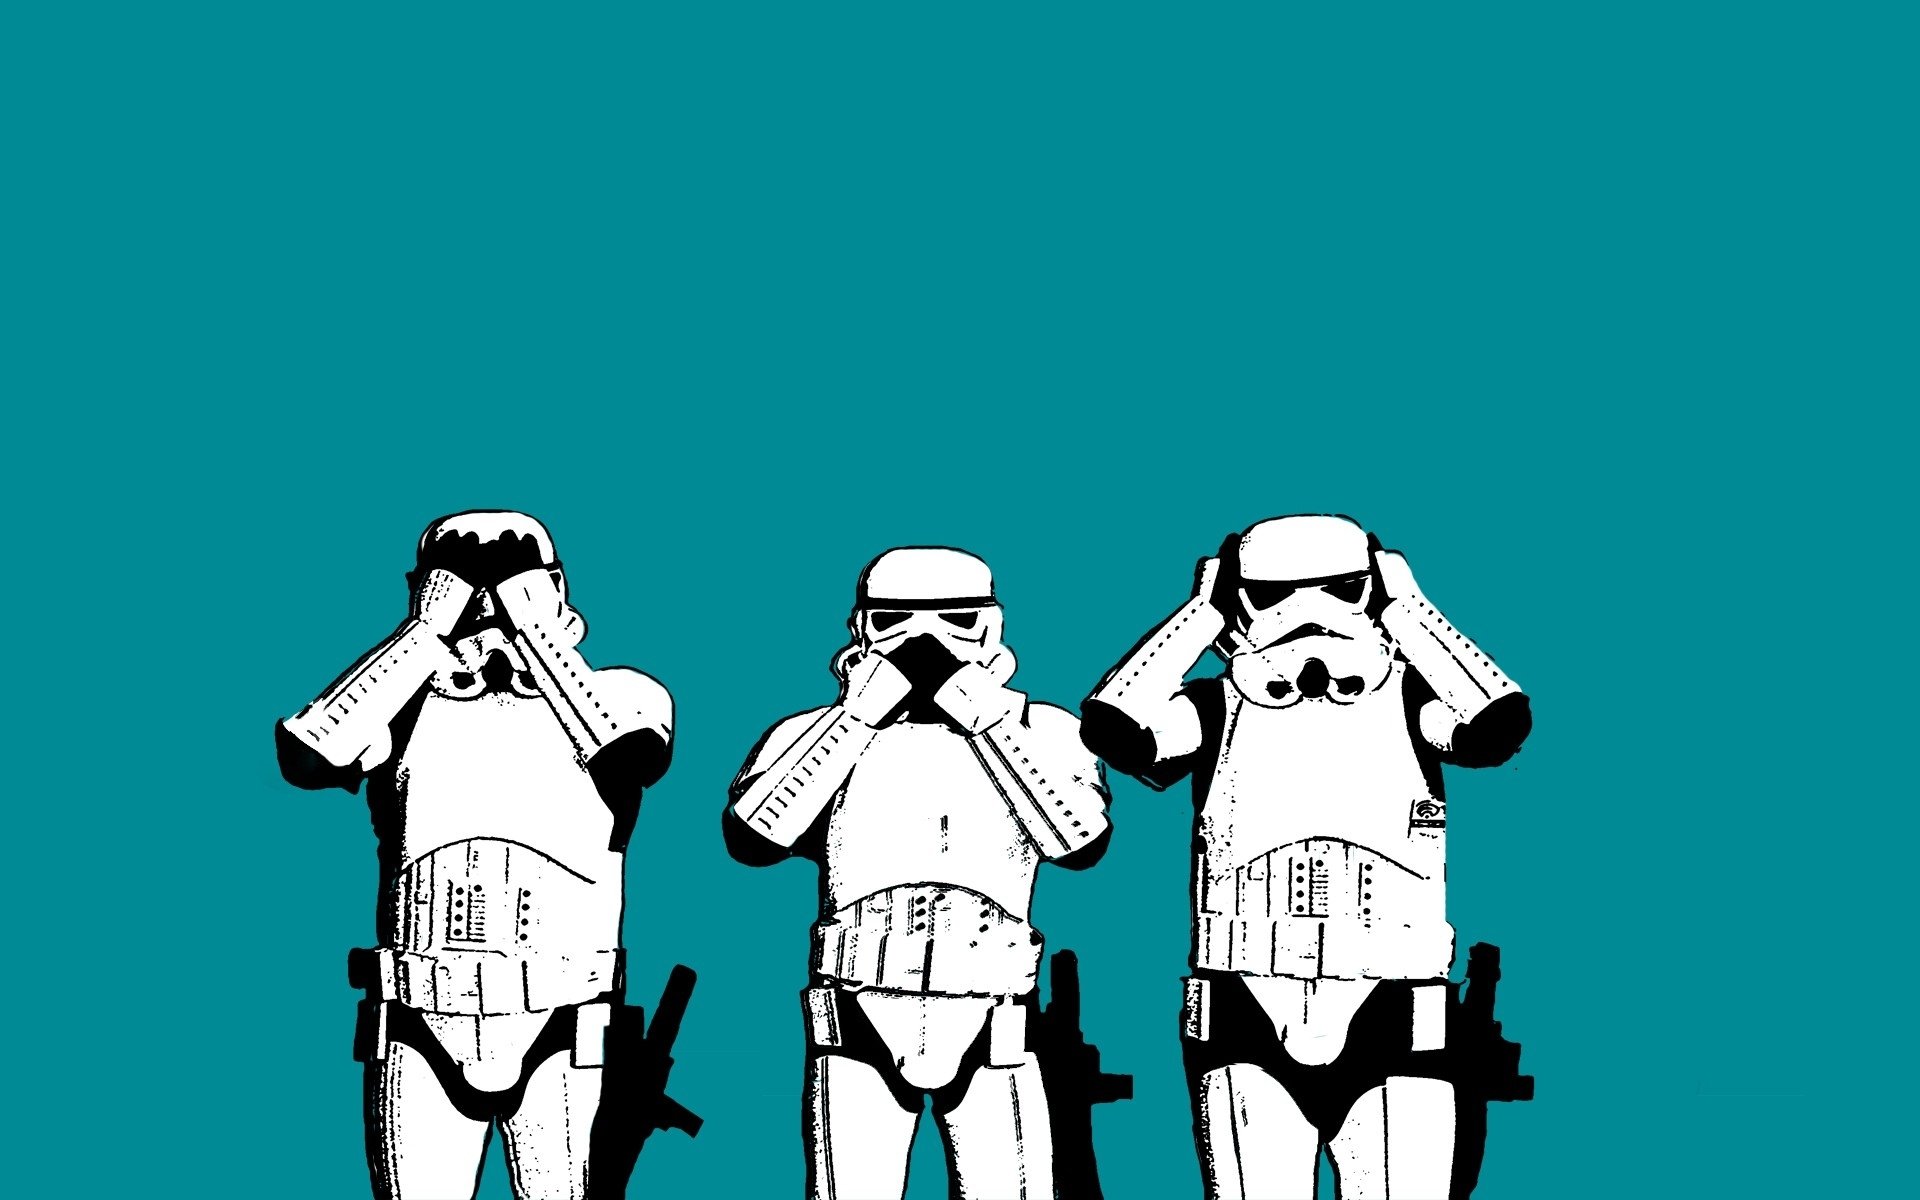 Star Wars Wallpapers Funny posted by Samantha Cunningham.